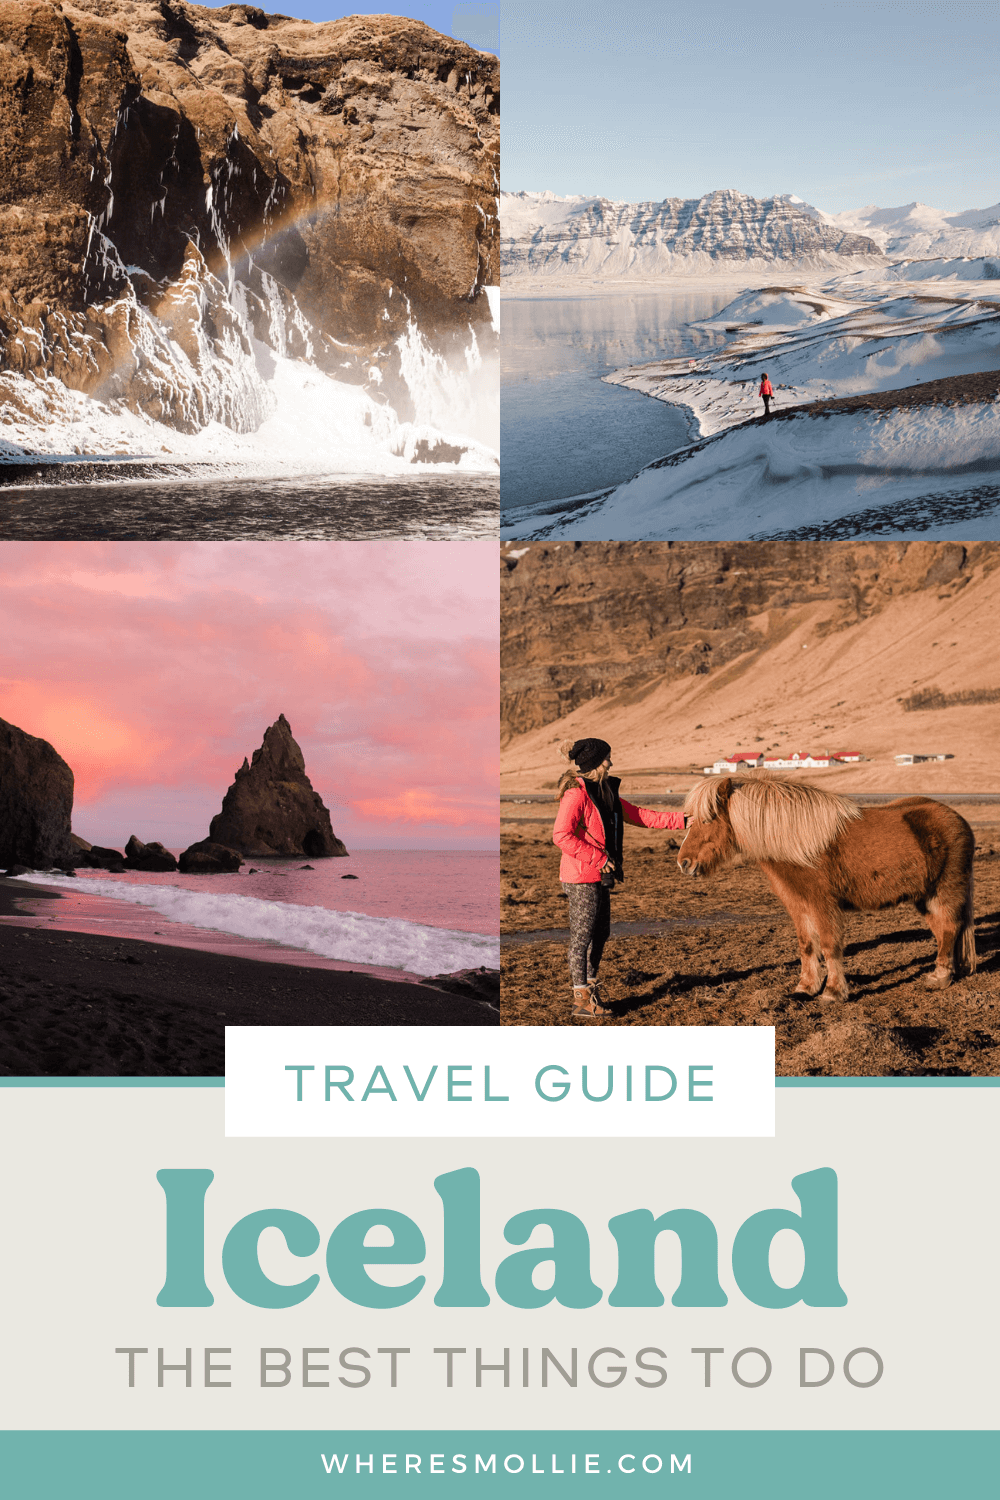 The best things to do in Iceland